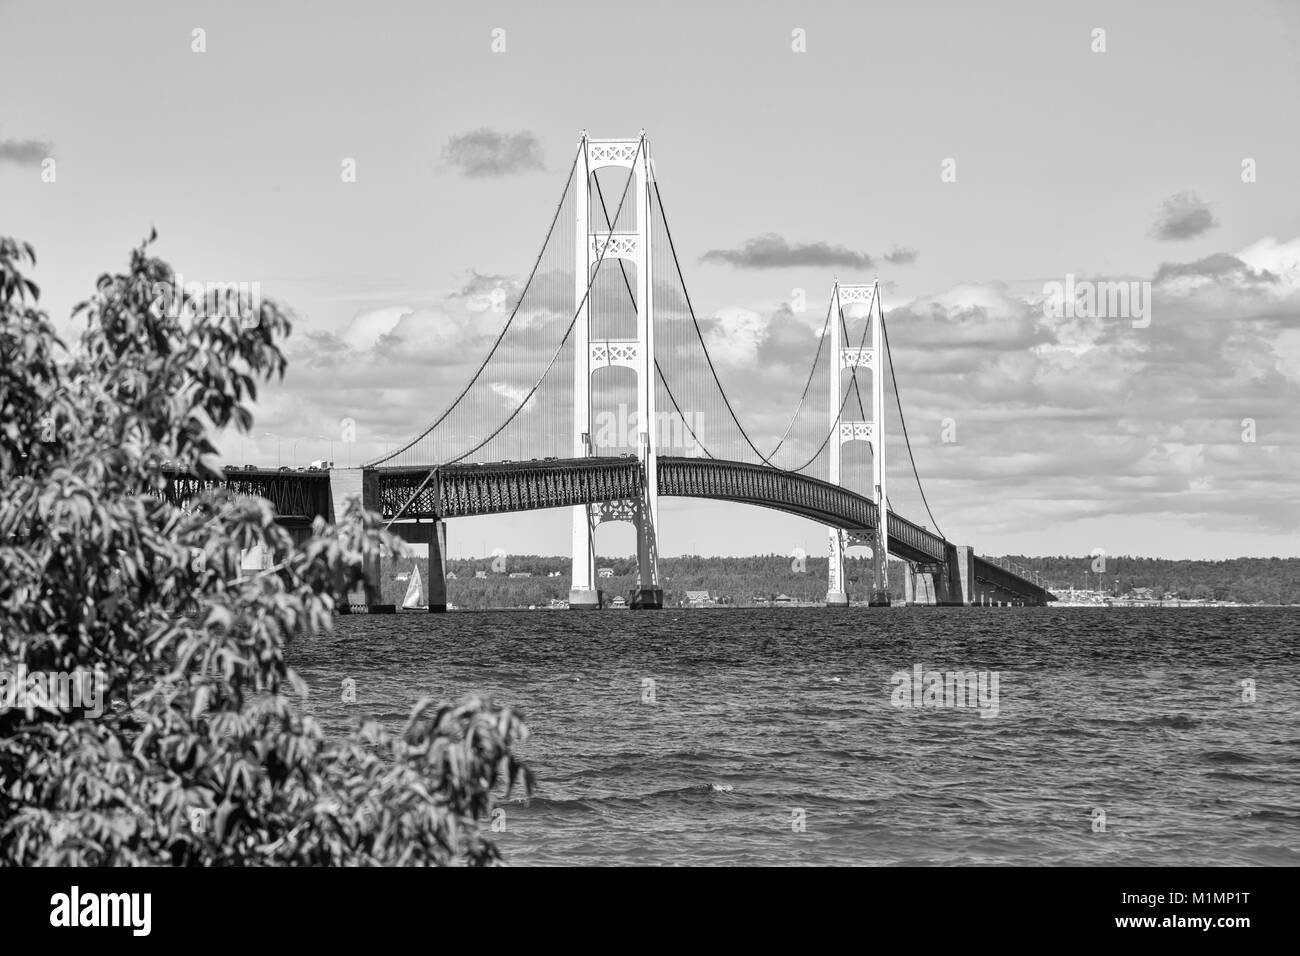 The Mackinac Bridge on a summer day. A suspension bridge spanning the Straits of Mackinac to connect the Upper and Lower Peninsulas of Michigan. Puffy Stock Photo